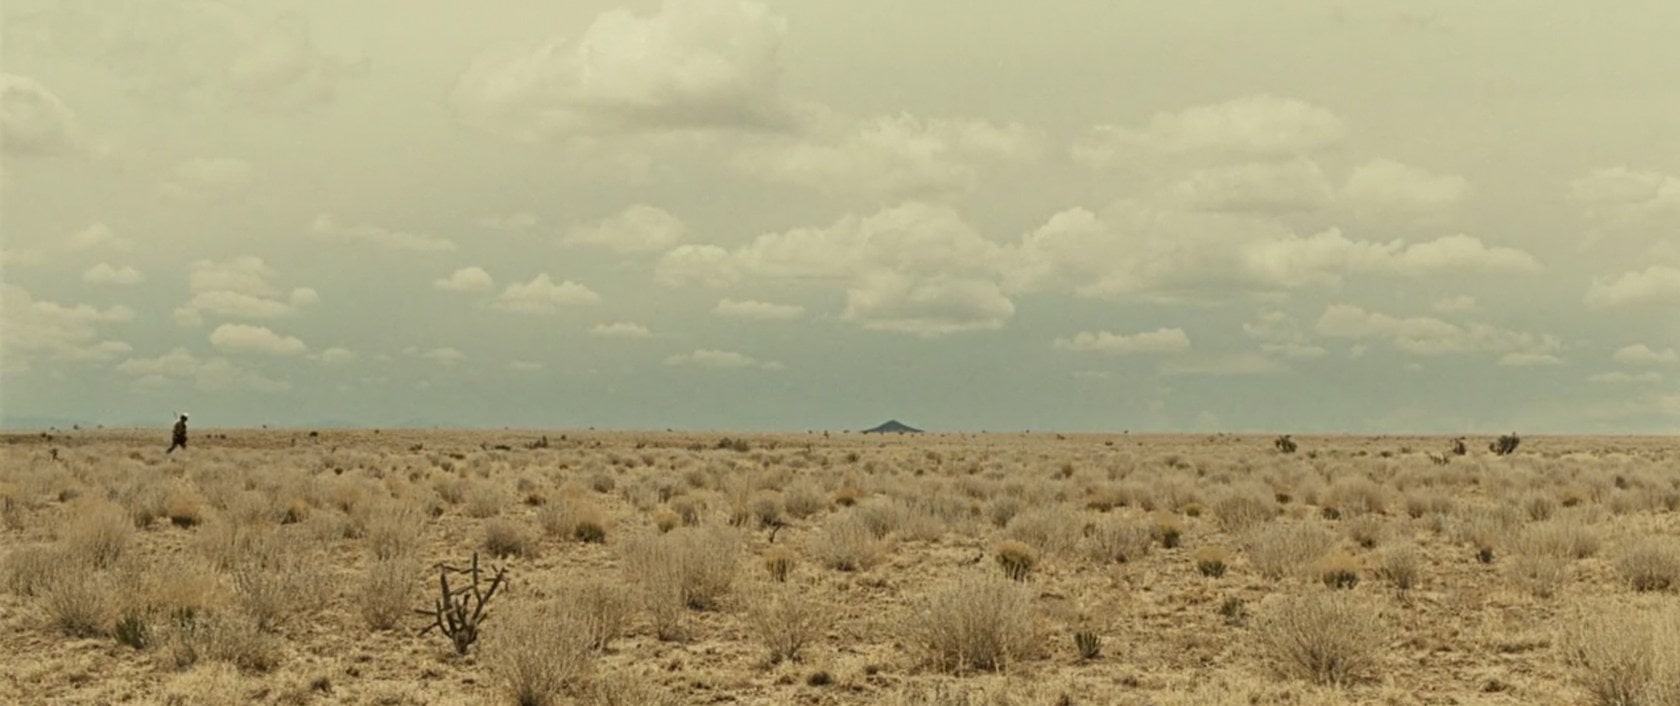 Working Cinematographer - Cinematography in No Country for Old Men - ProductionBeast